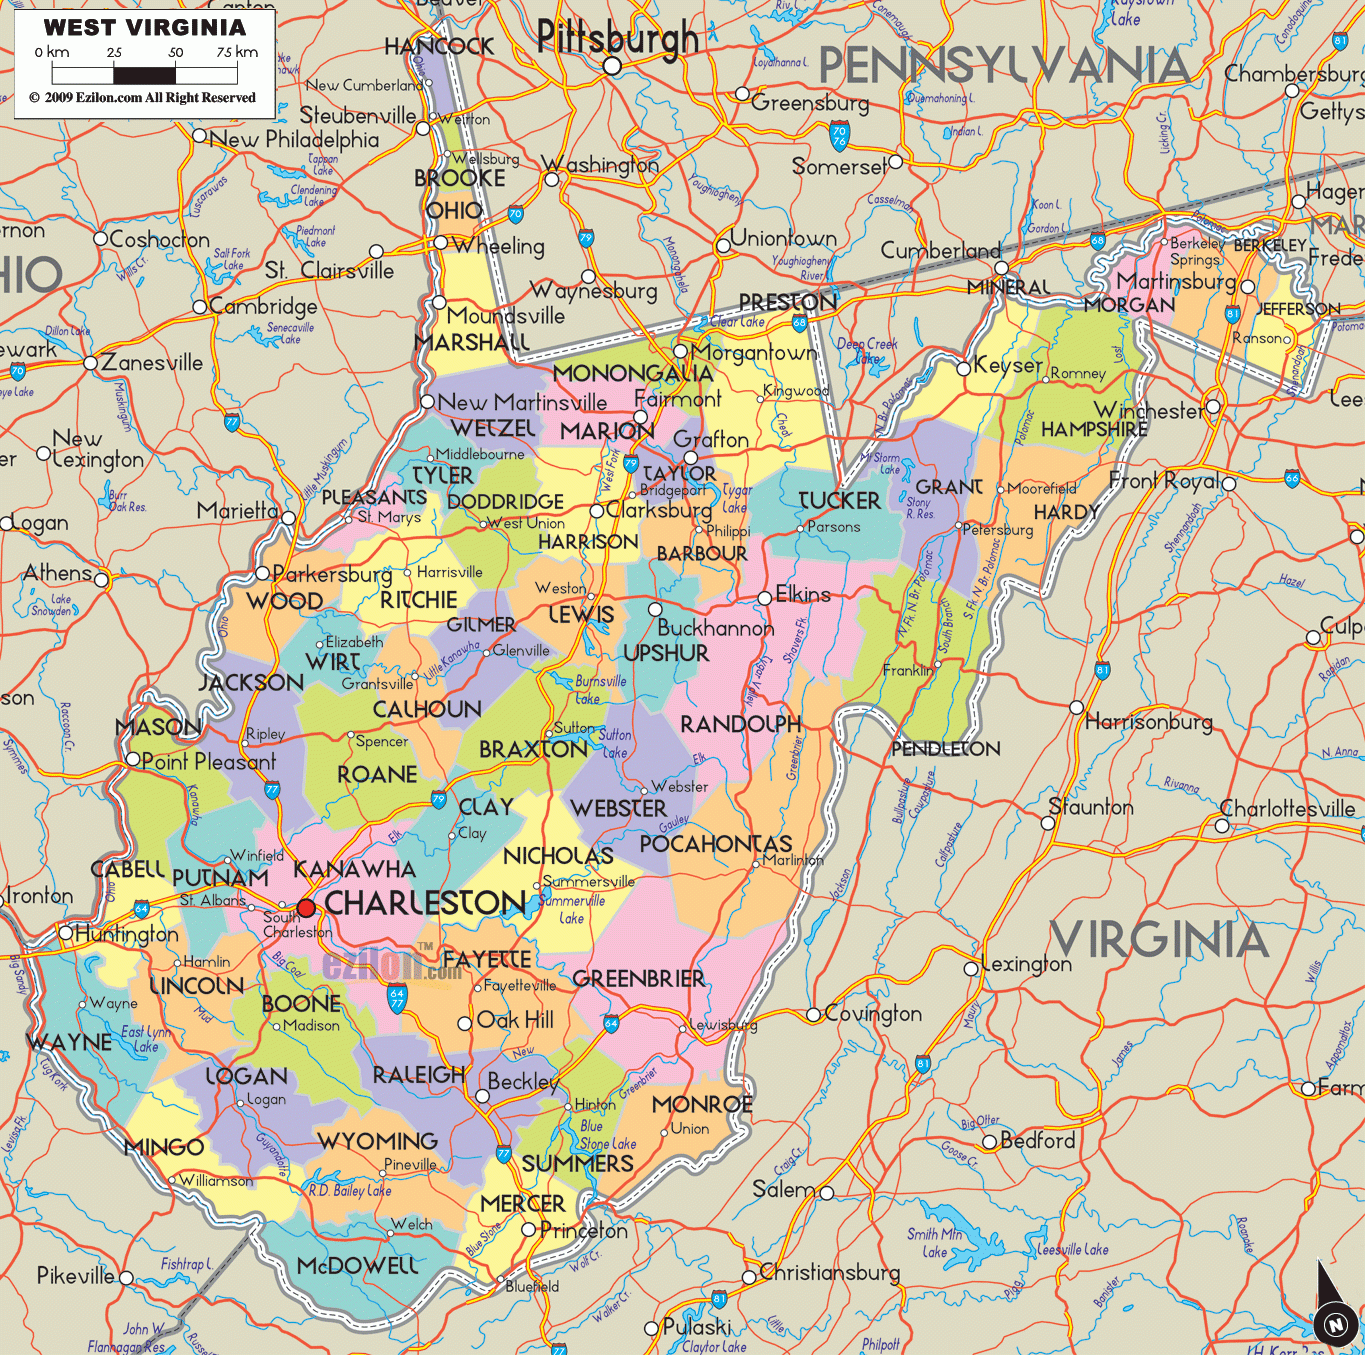 County Map Of West Virginia And Virginia